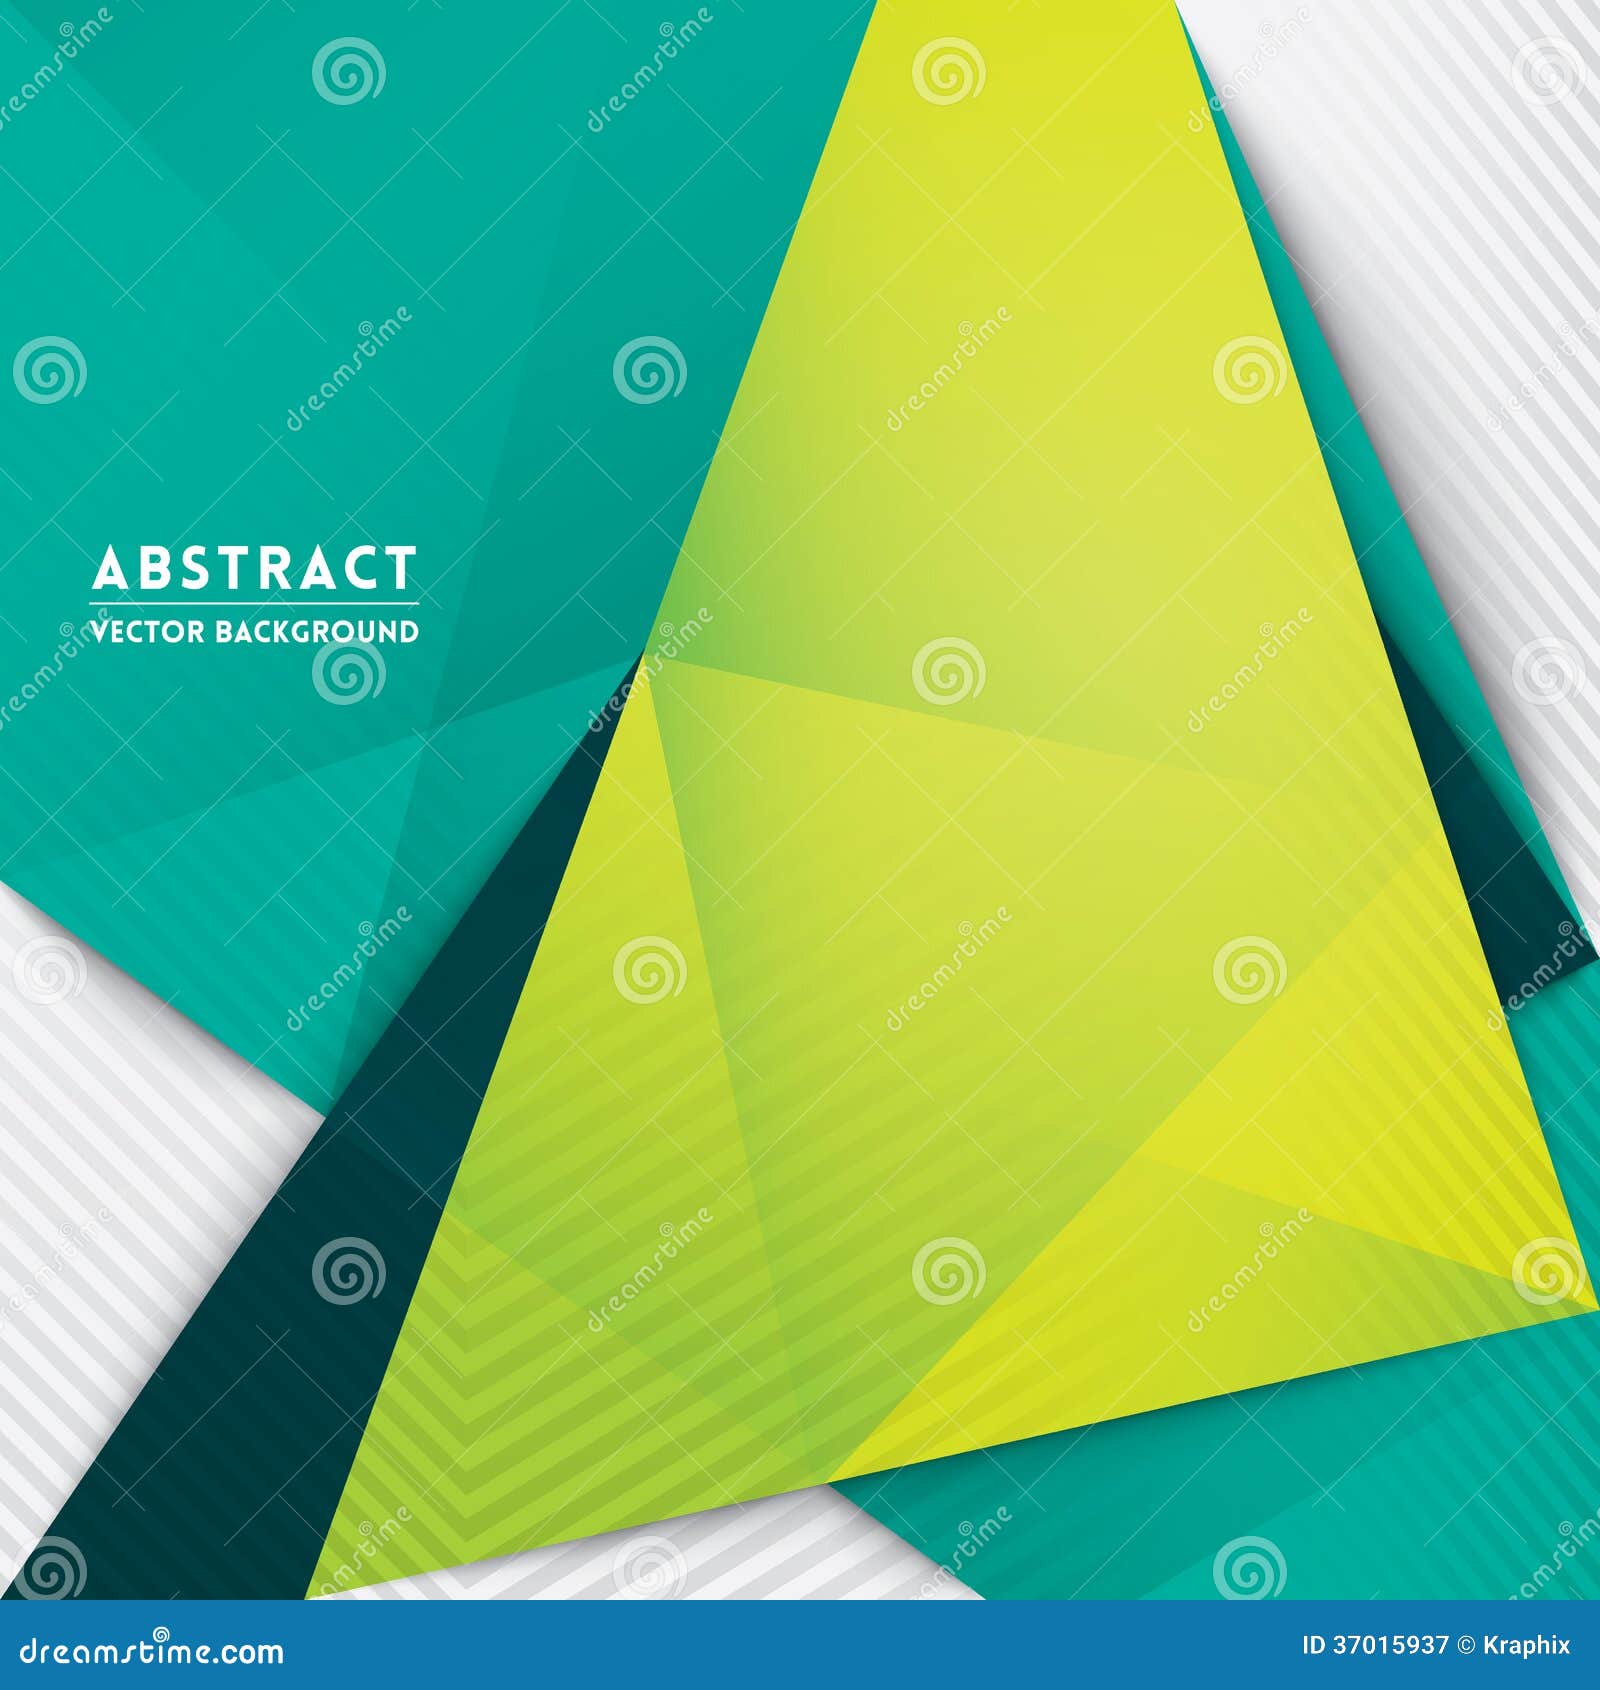 abstract triangle  background